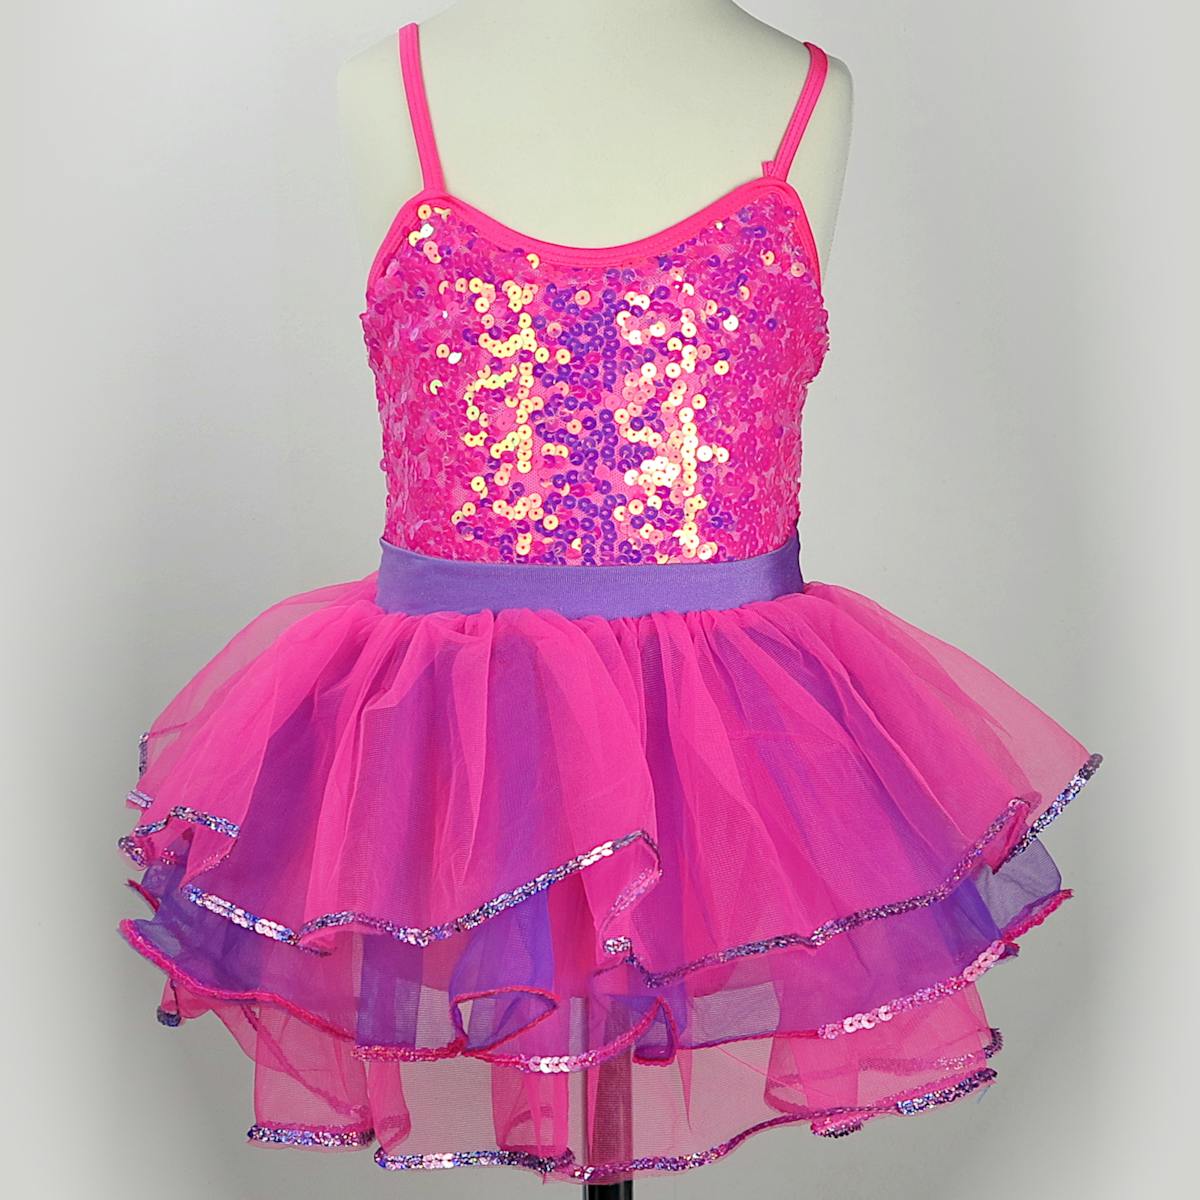 Hire Pink Sparkle Tutu From Costume Source Ballet Costume For Hire 